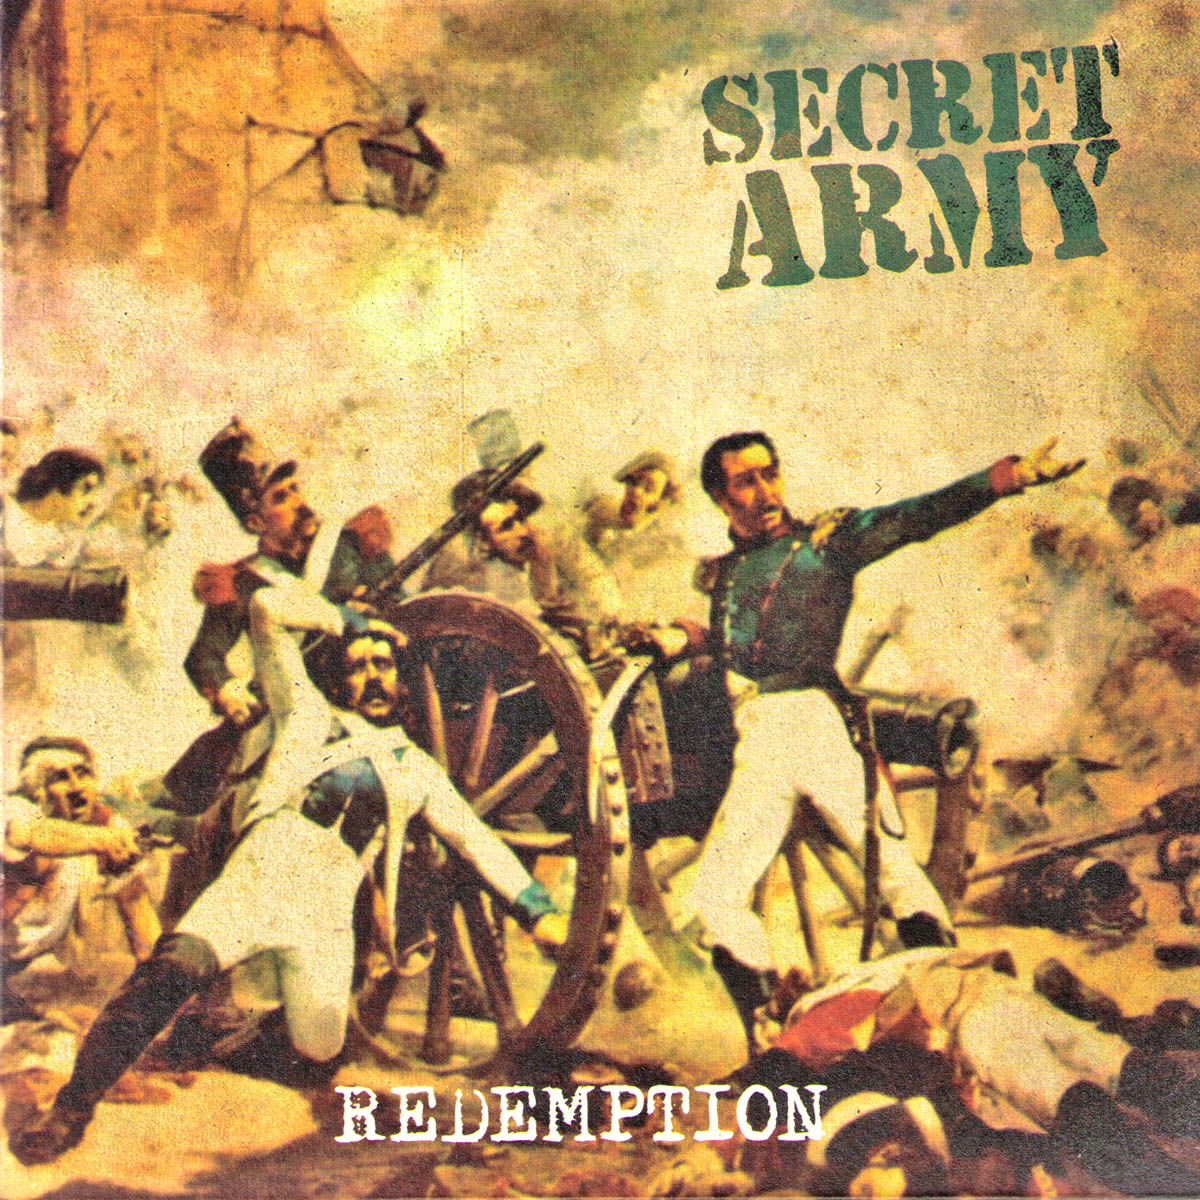 Secret Army- Redemption 7" ~BLITZ / RARE BEER COLORED WAX!